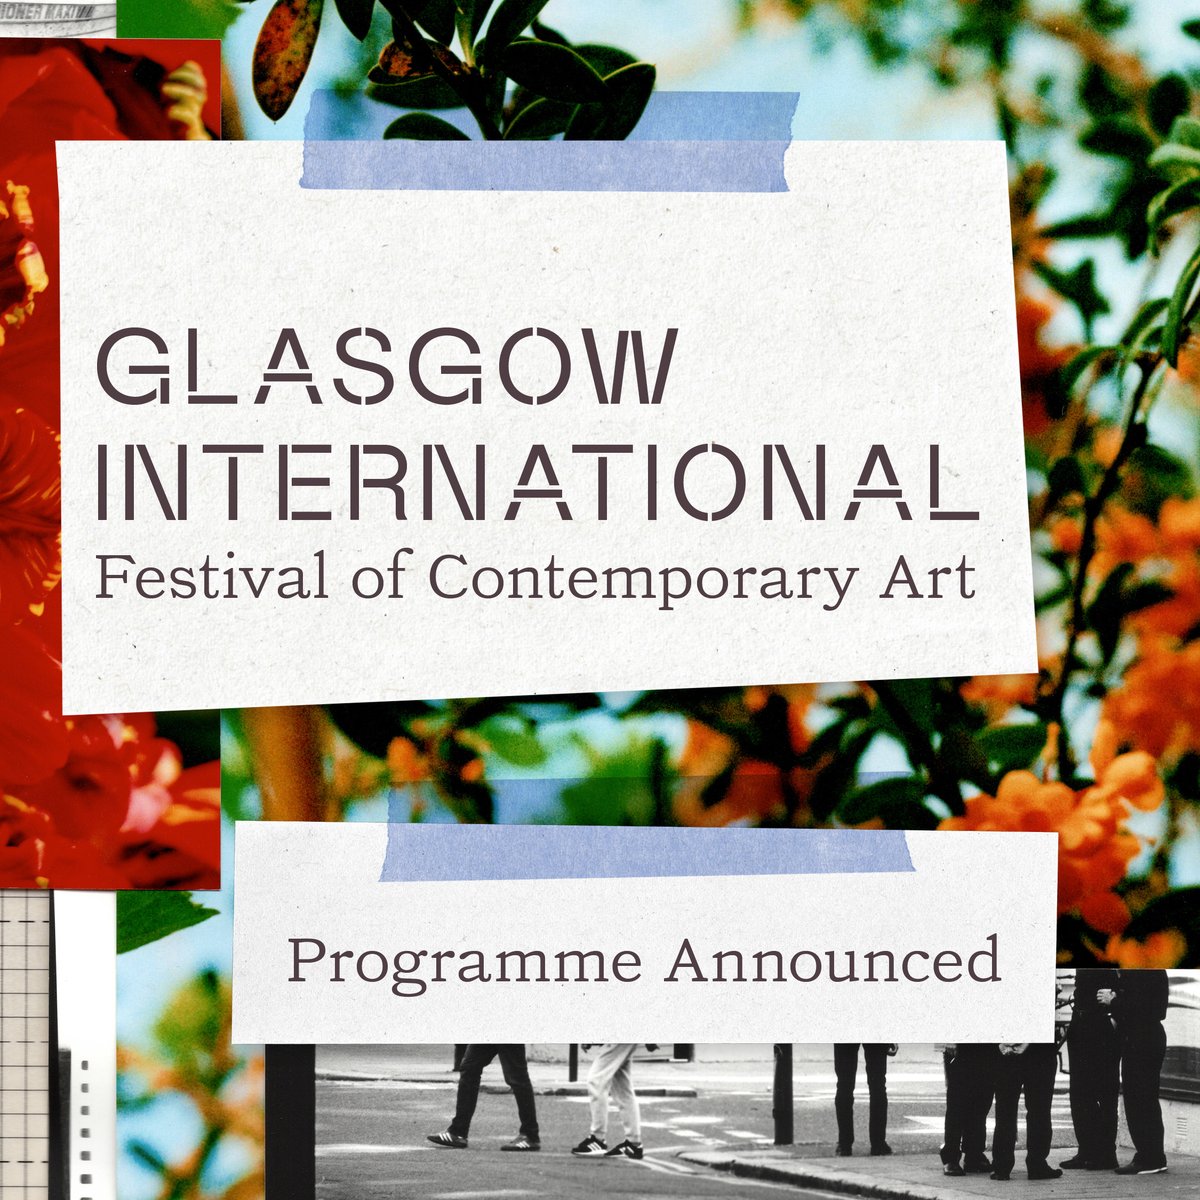 Glasgow International, Scotland's biennial festival of contemporary art, have today launched their full programme, taking place across the city (including GoMA!) and online between 7 - 23 June. Explore now: glasgowinternational.org